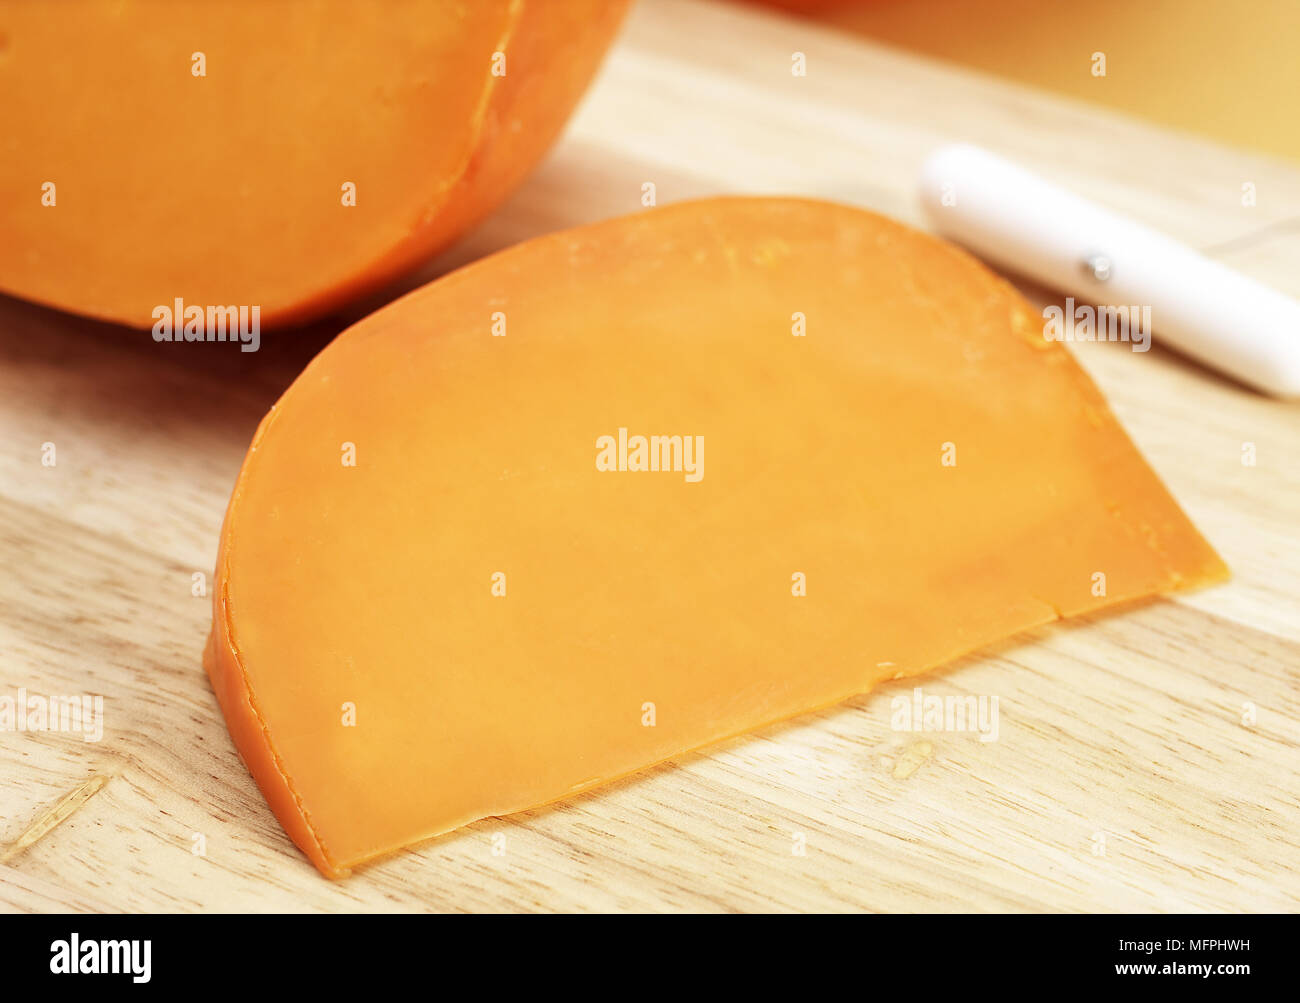 French Cheese called Mimolette, Cheese made from Cow's Milk Stock Photo